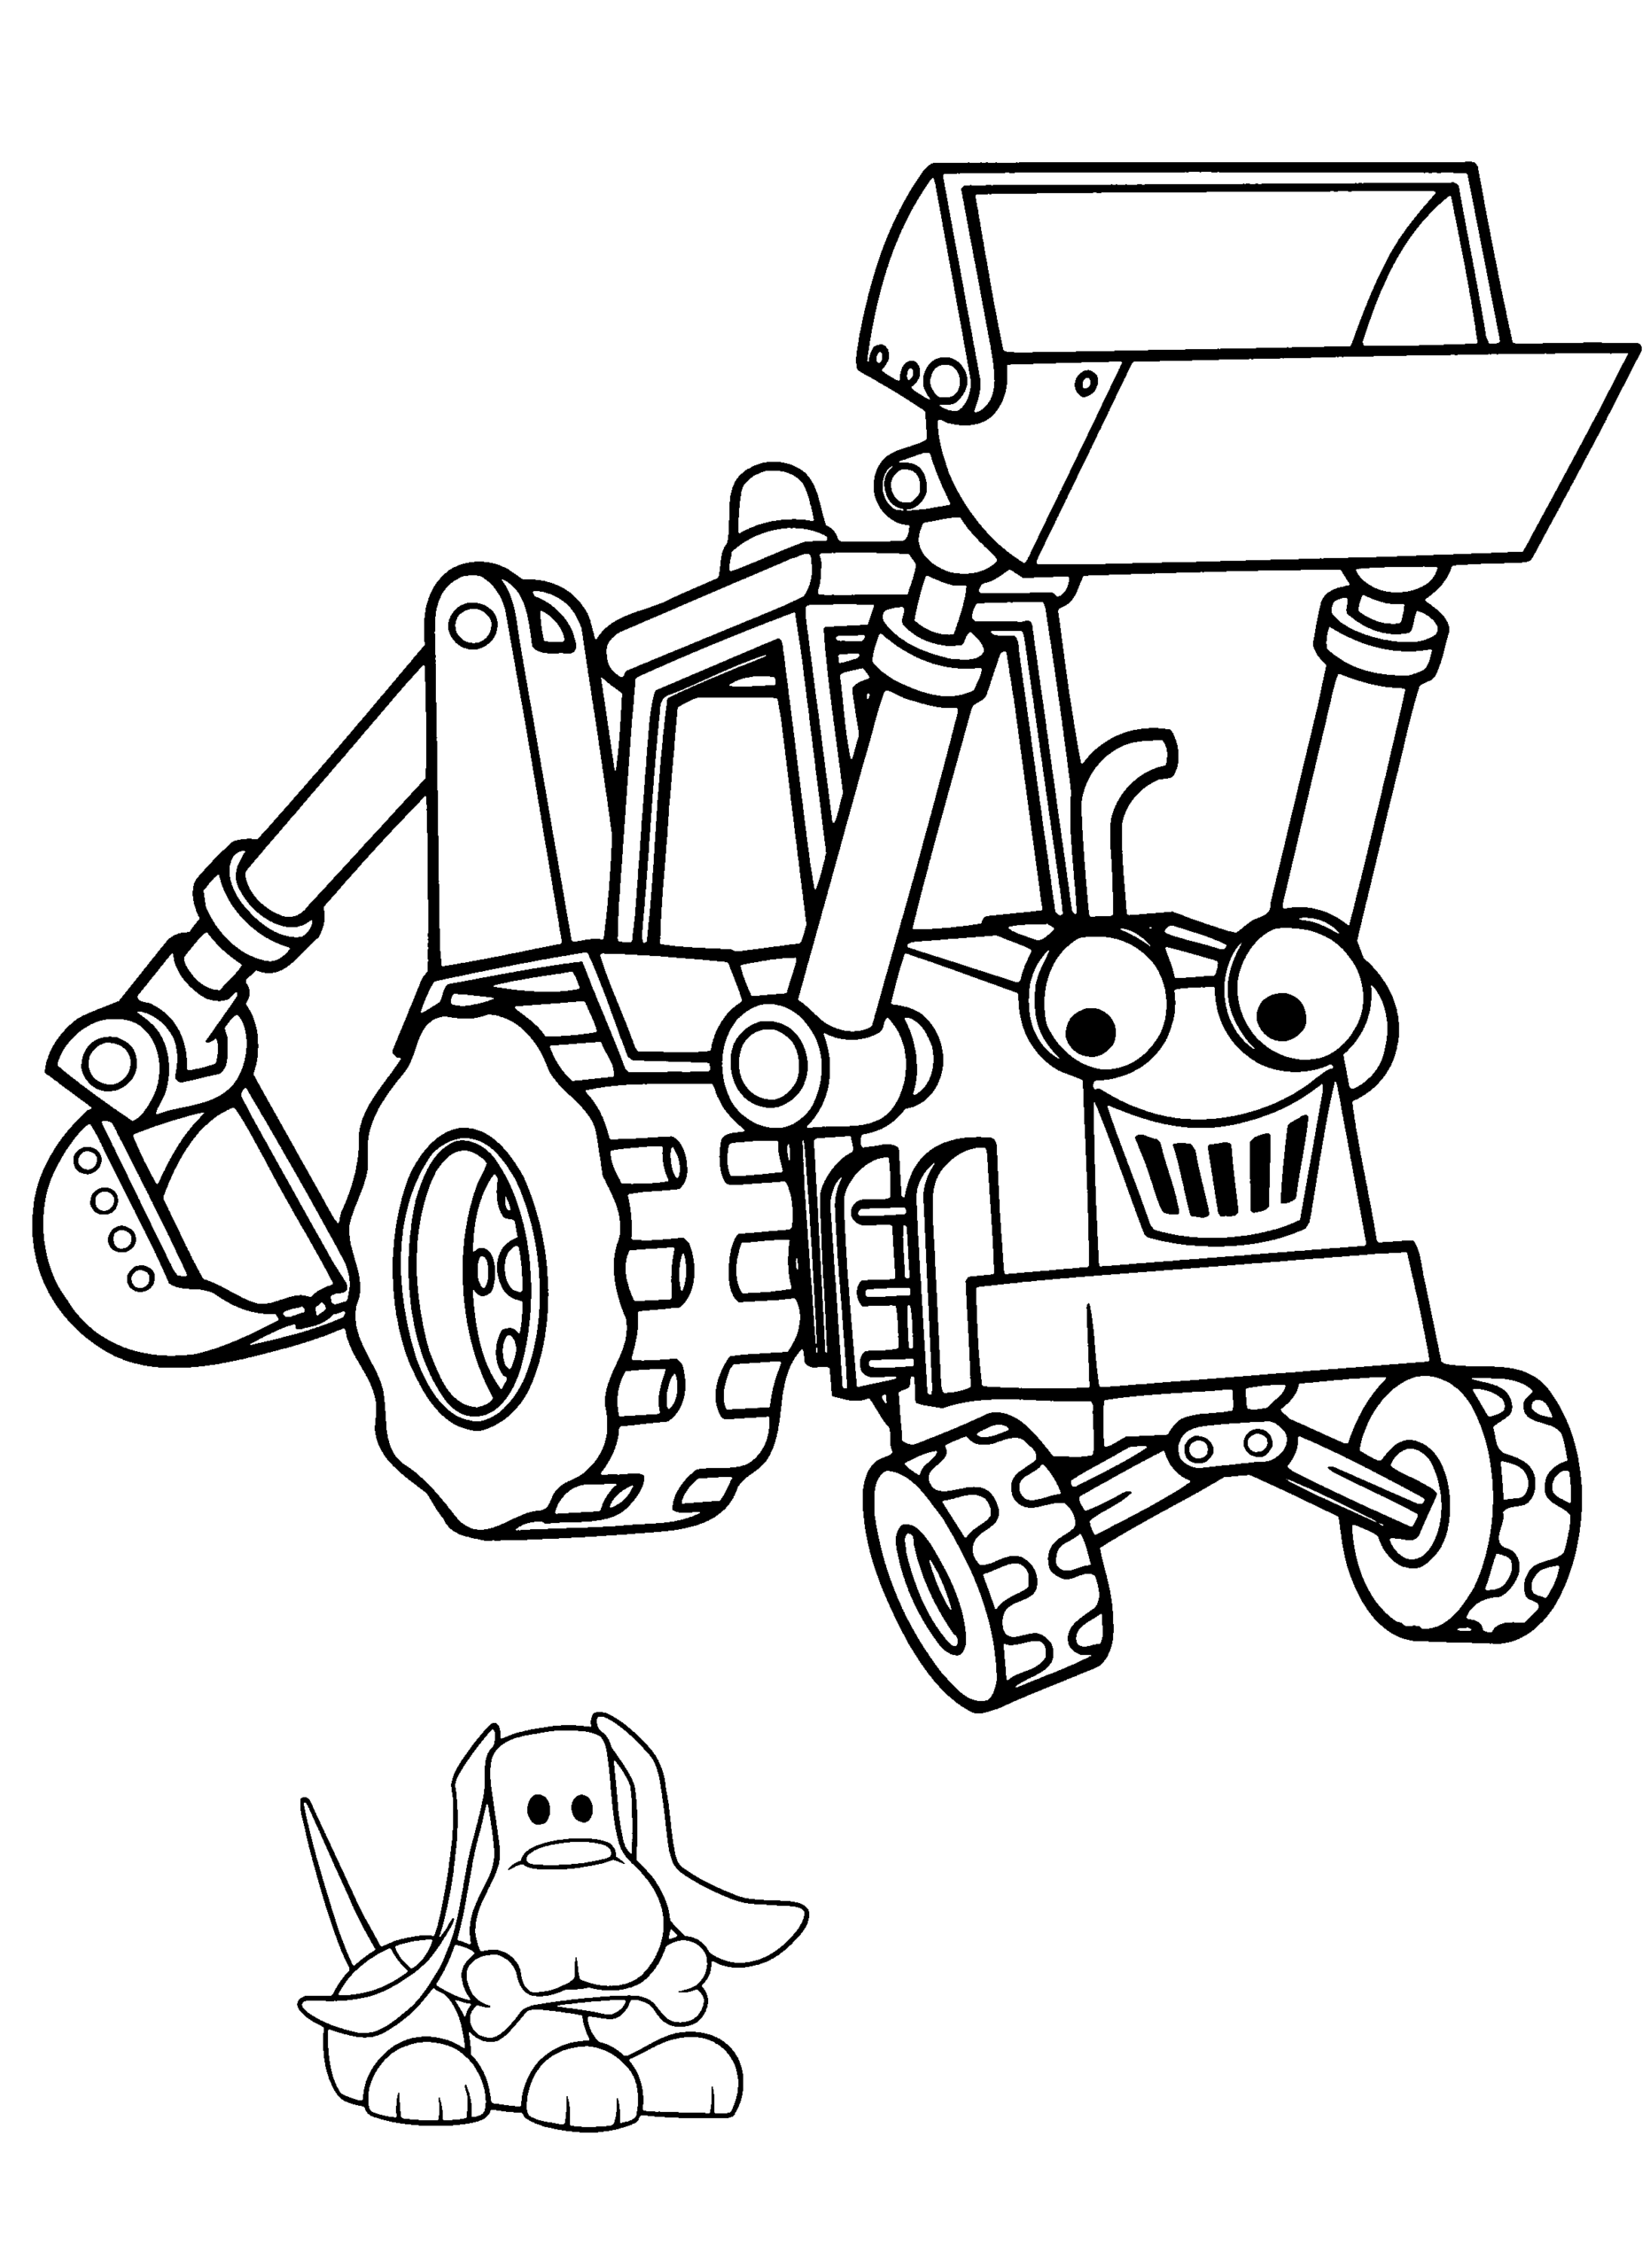 Bob the Builder Coloring Pages TV Film bob the builder 33 Printable 2020 01052 Coloring4free